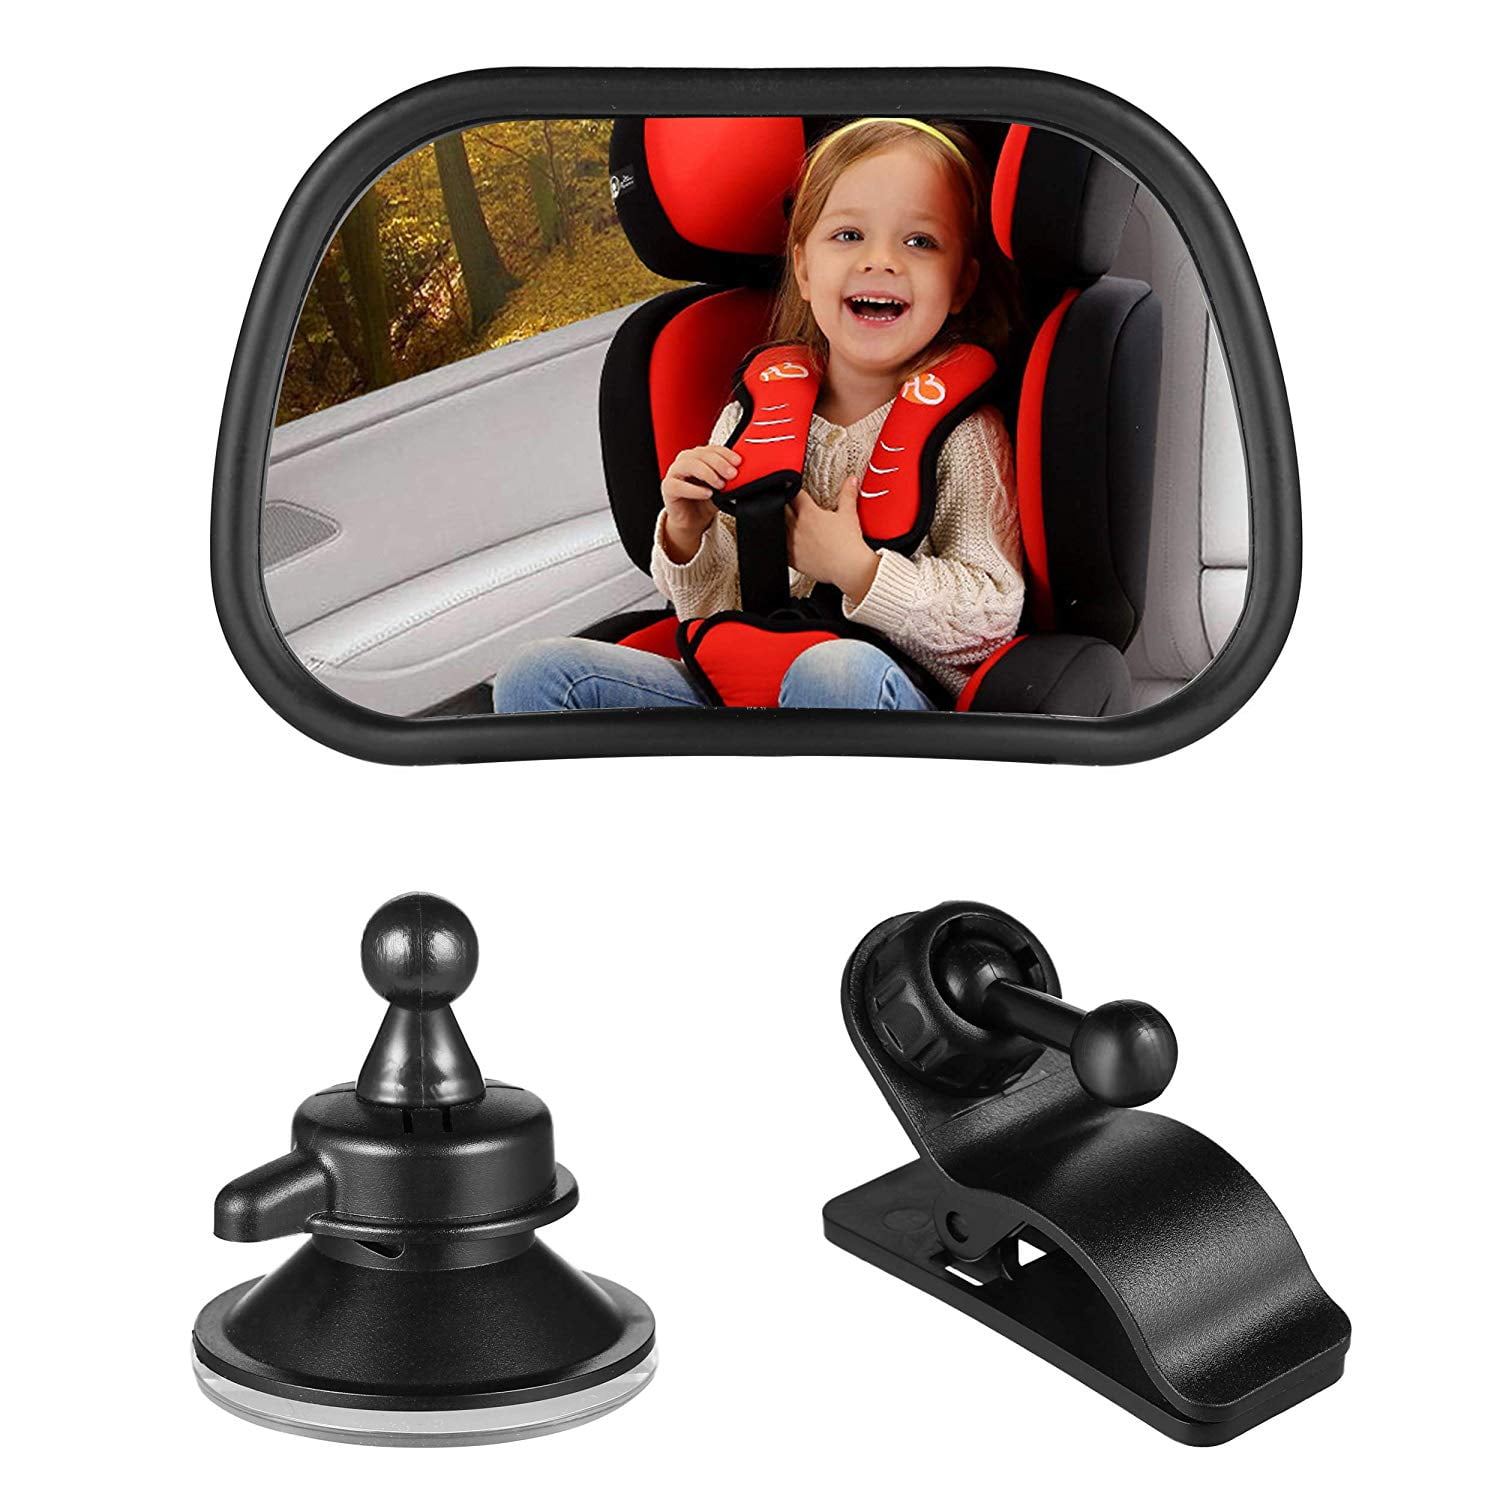 Zogeez 2 In 1 Baby View Mirror, See All Small Safety Mirror